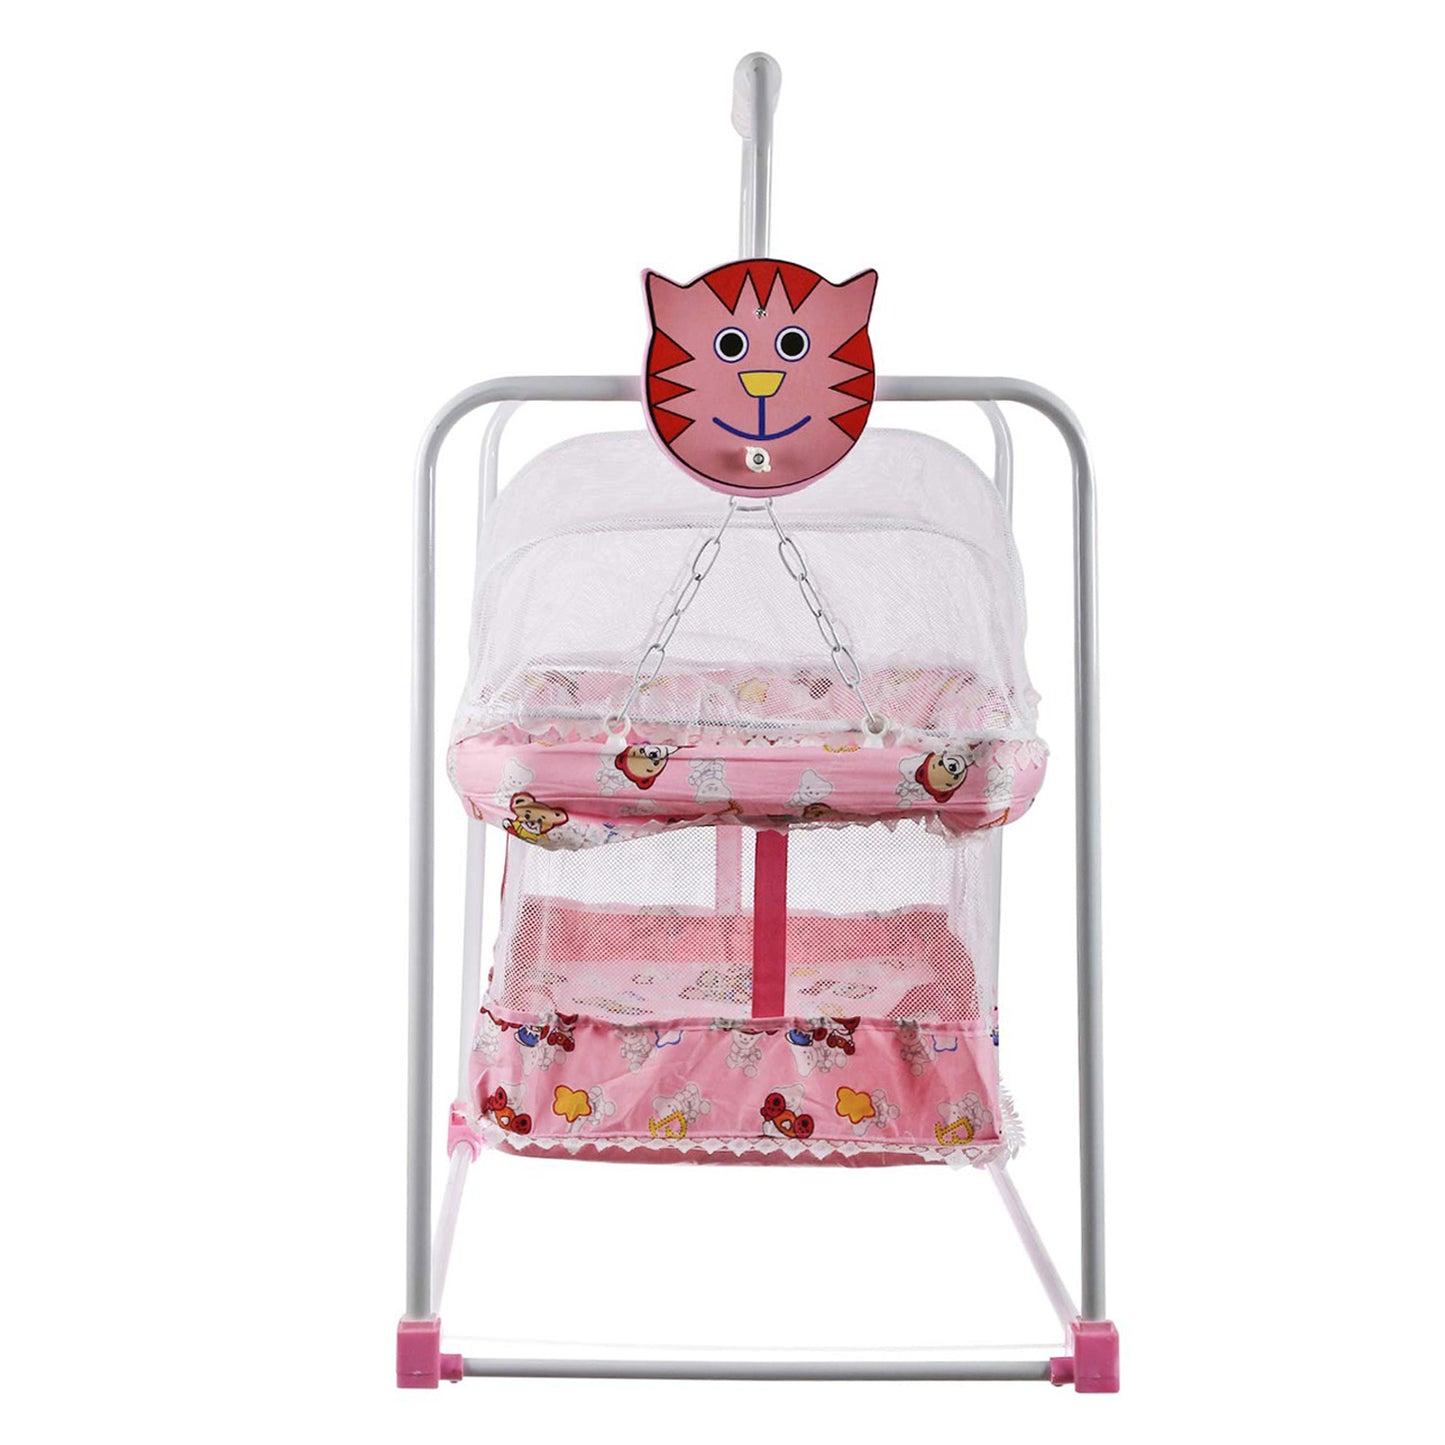 NHR Baby Cradle with Mosquito Net (Pink)